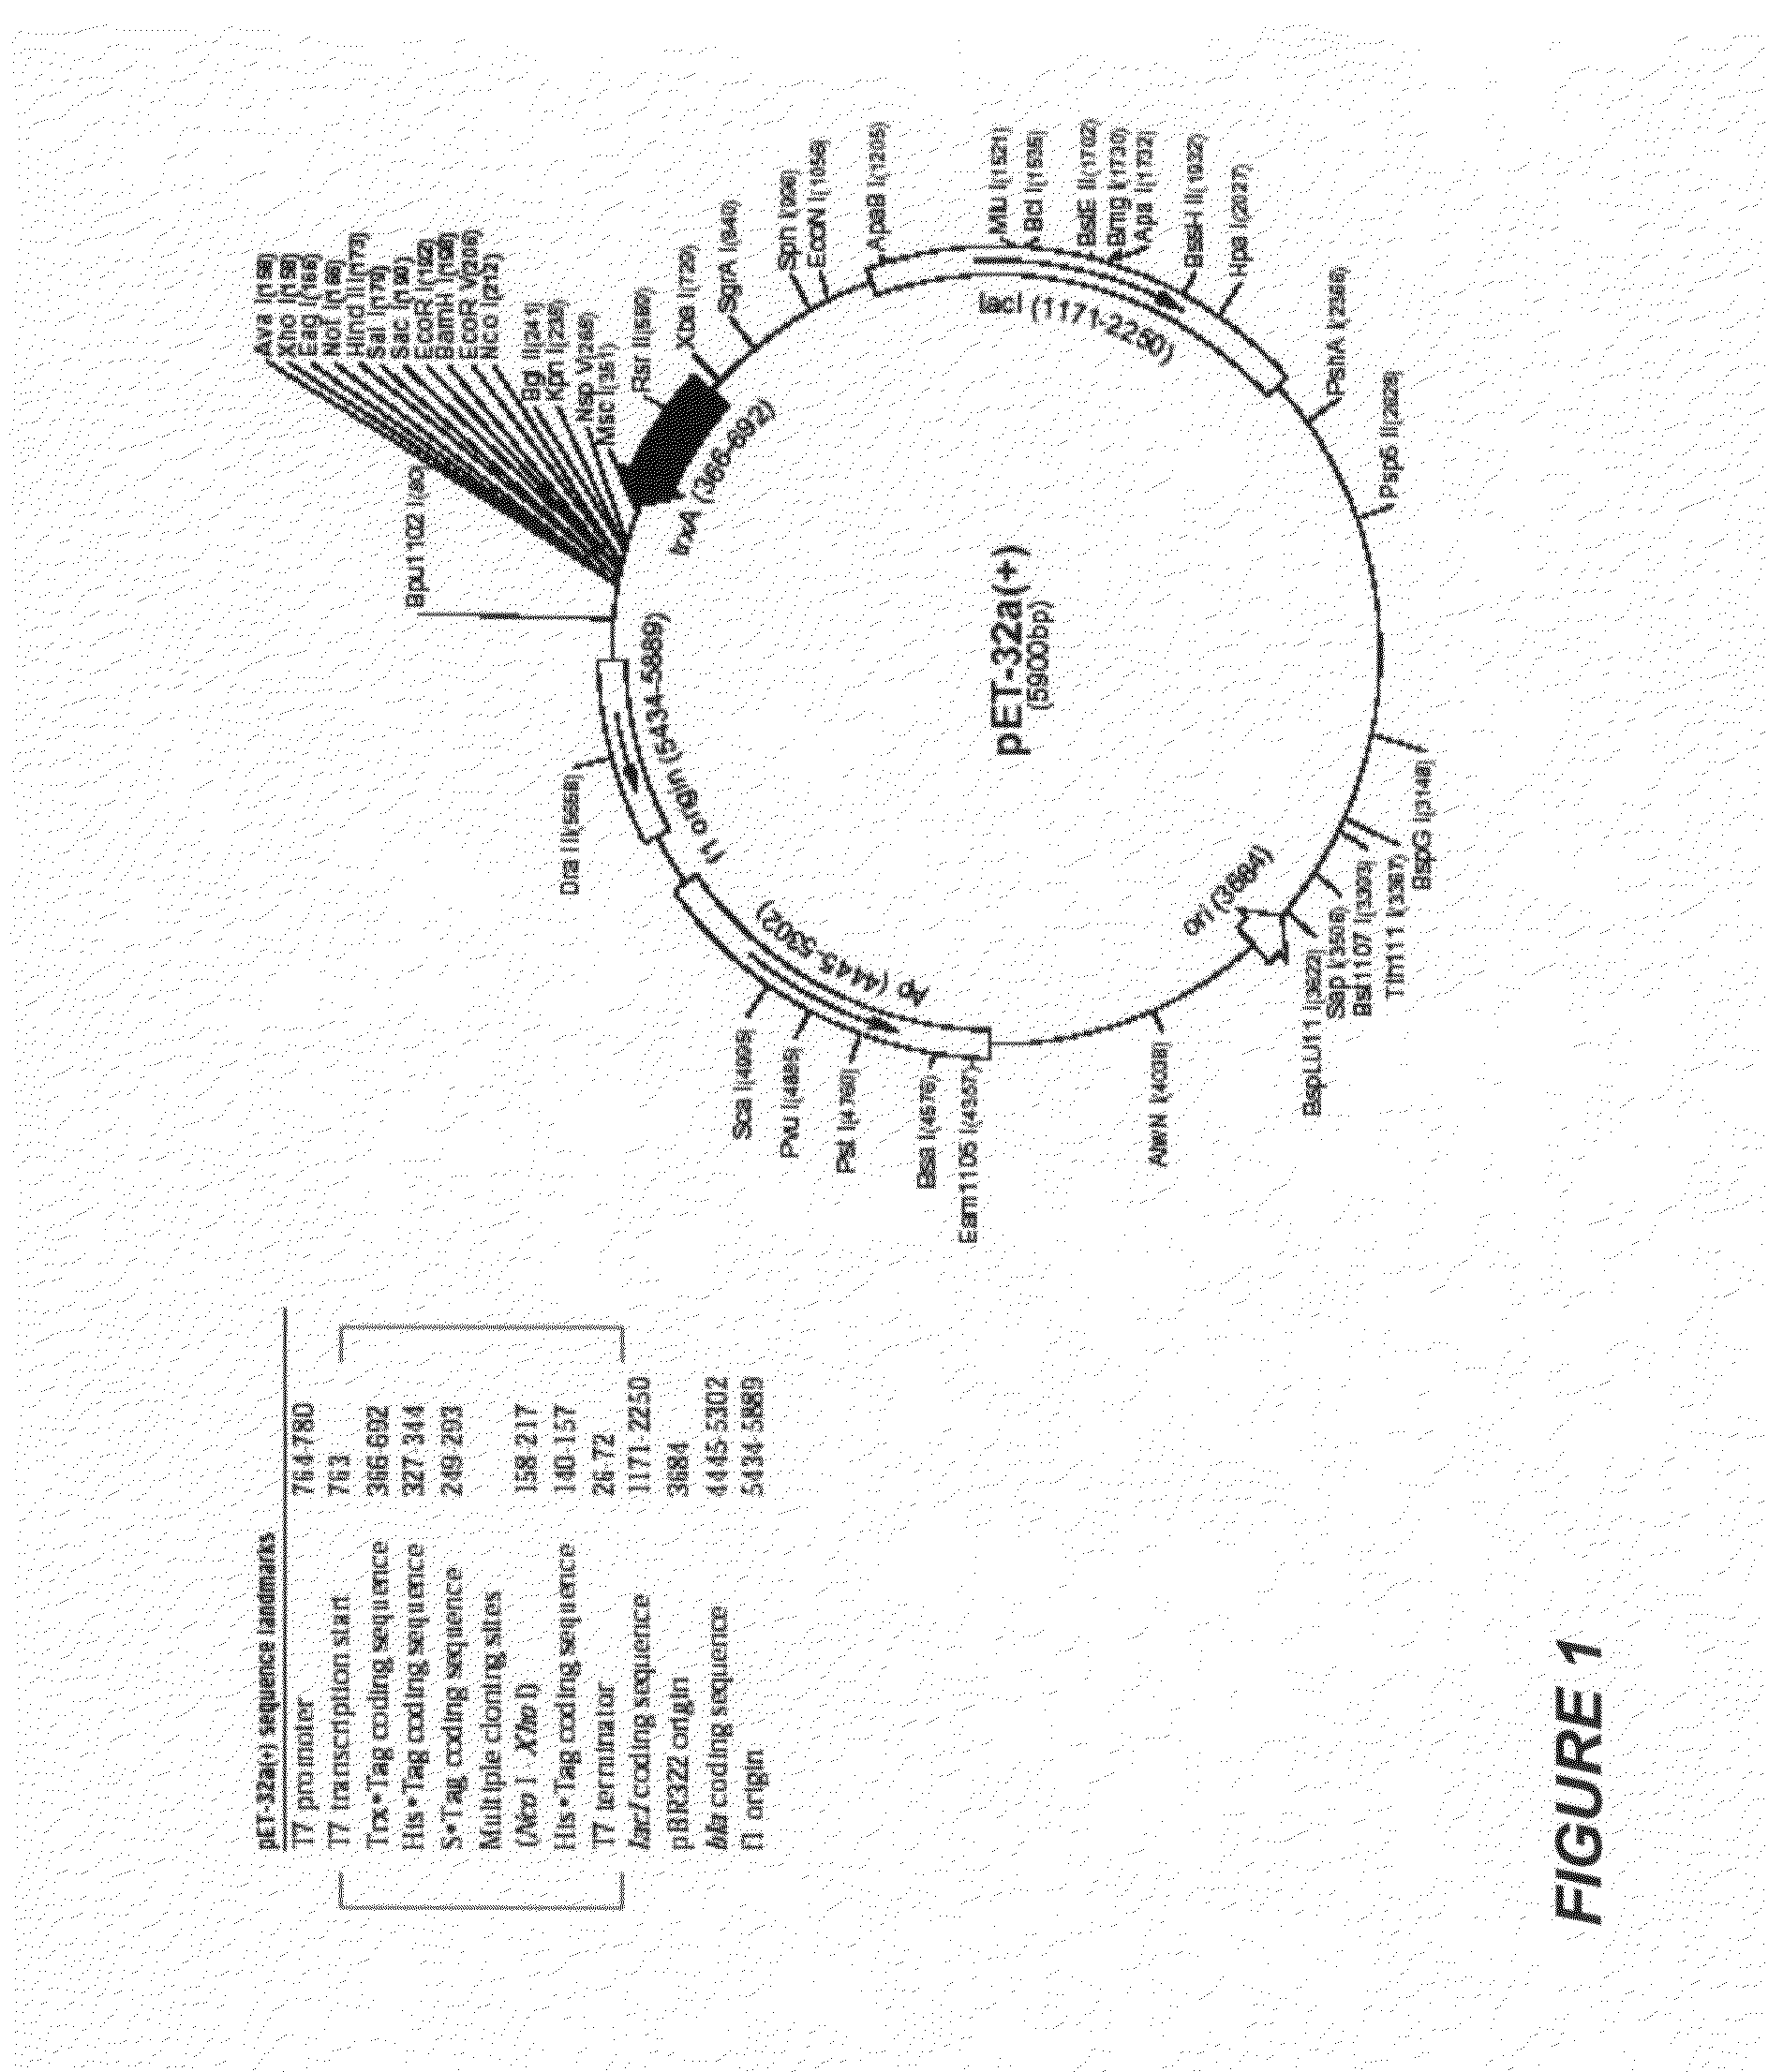 Influenza antibodies, compositions, and related methods